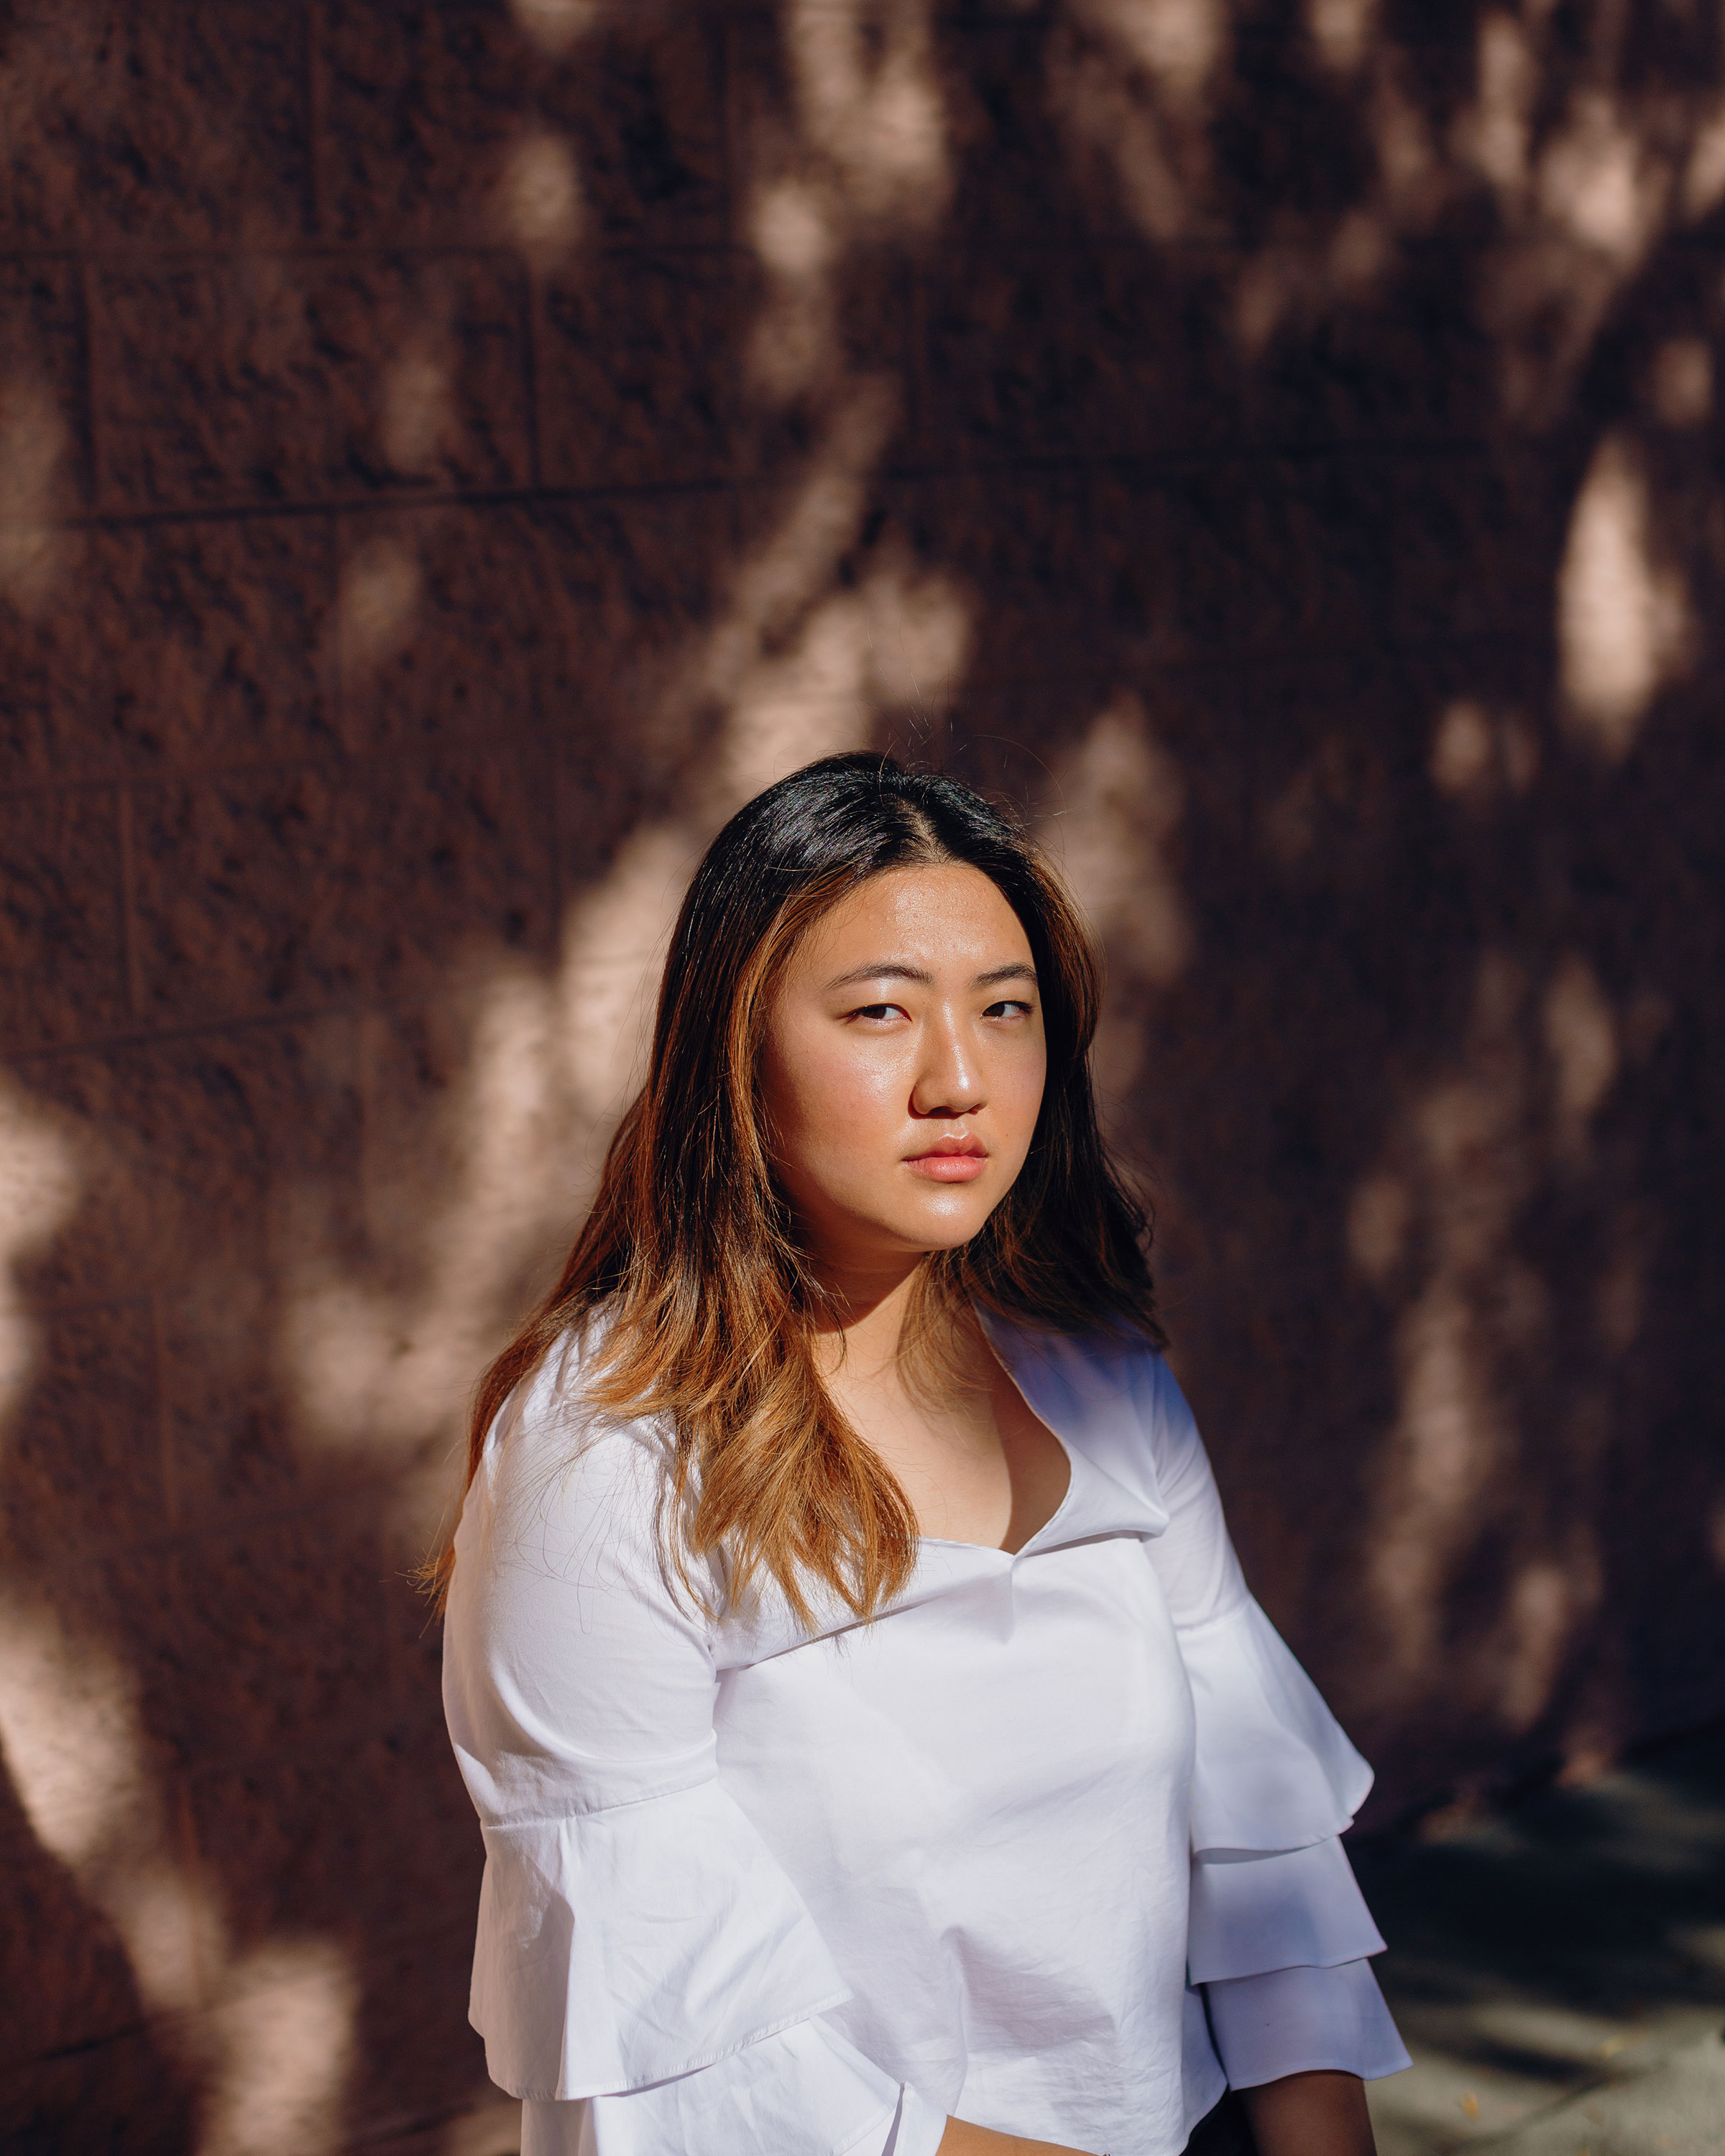 Hannah Hae In Kim in Los Angeles, on Dec. 6, 2020. (Bethany Mollenkof for TIME)